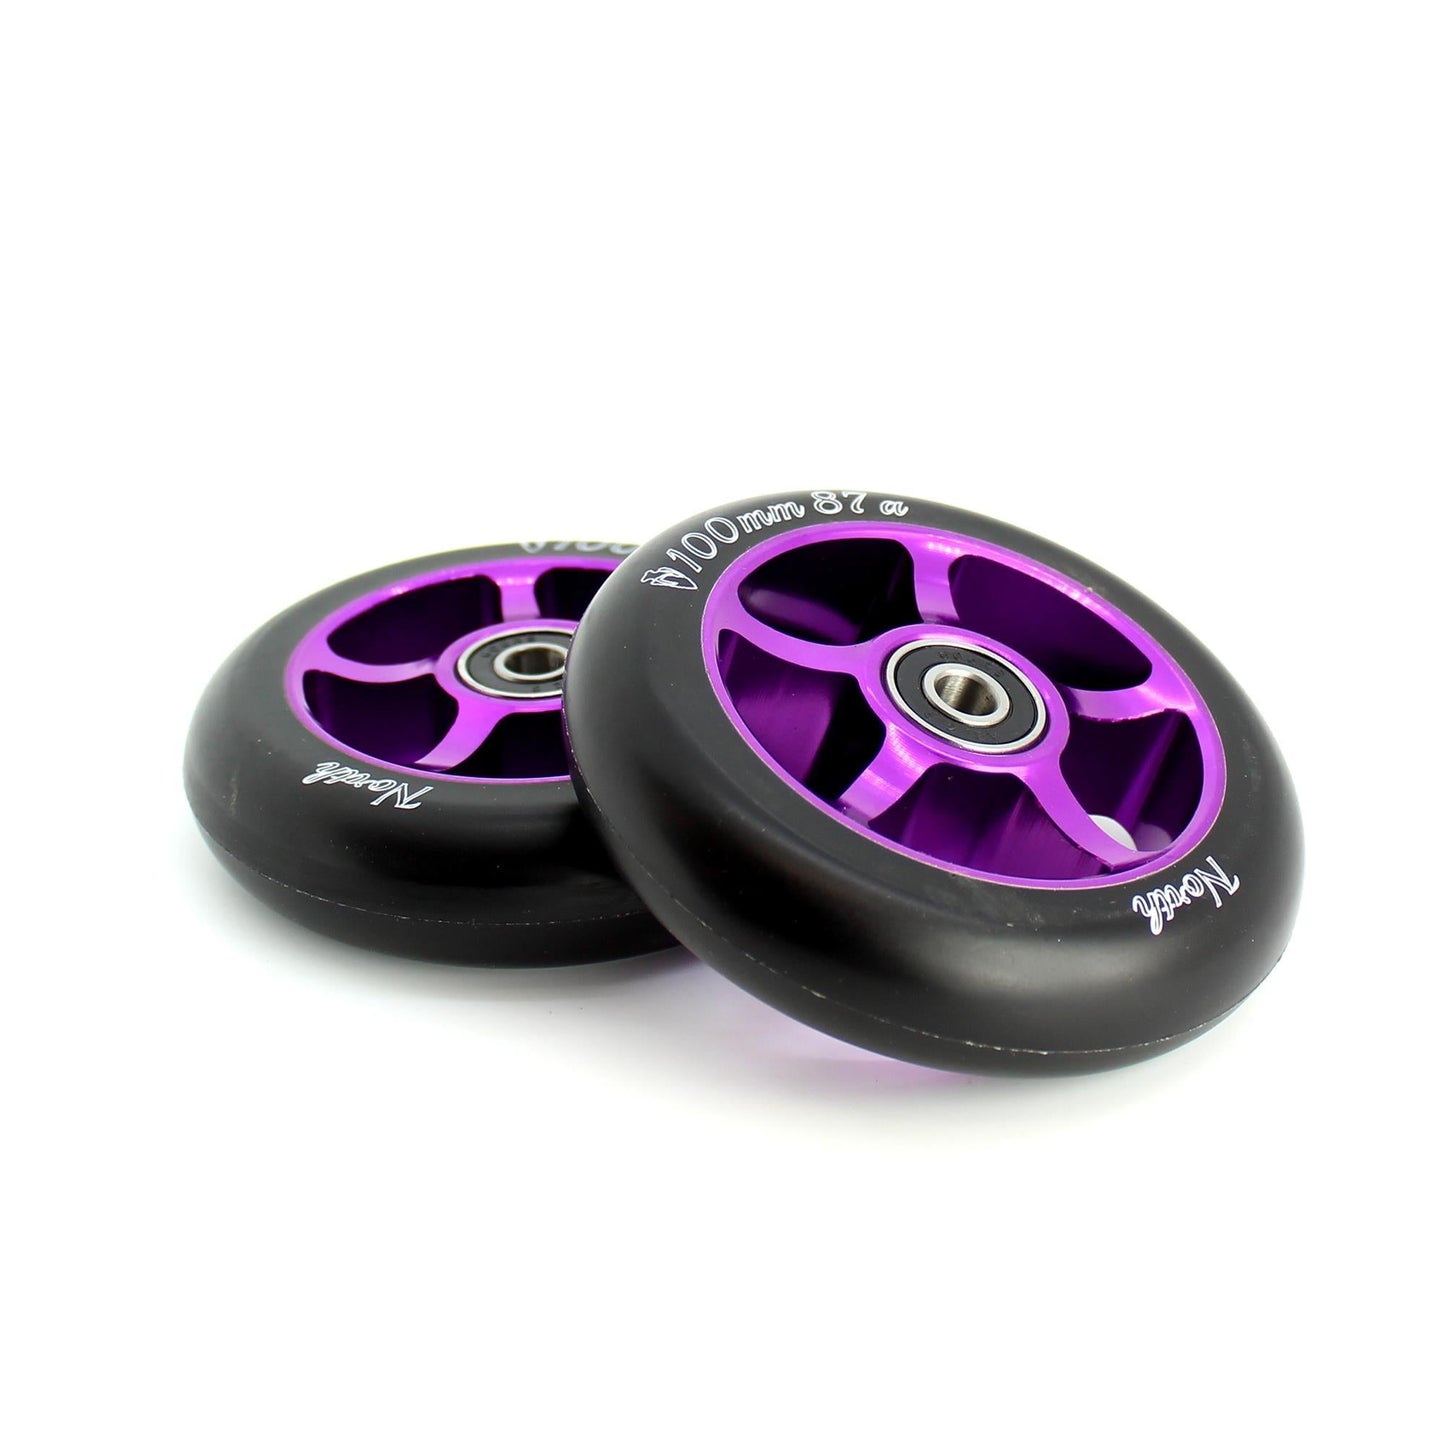 North Scooters 1st Wheel 87A 100mm- Pair